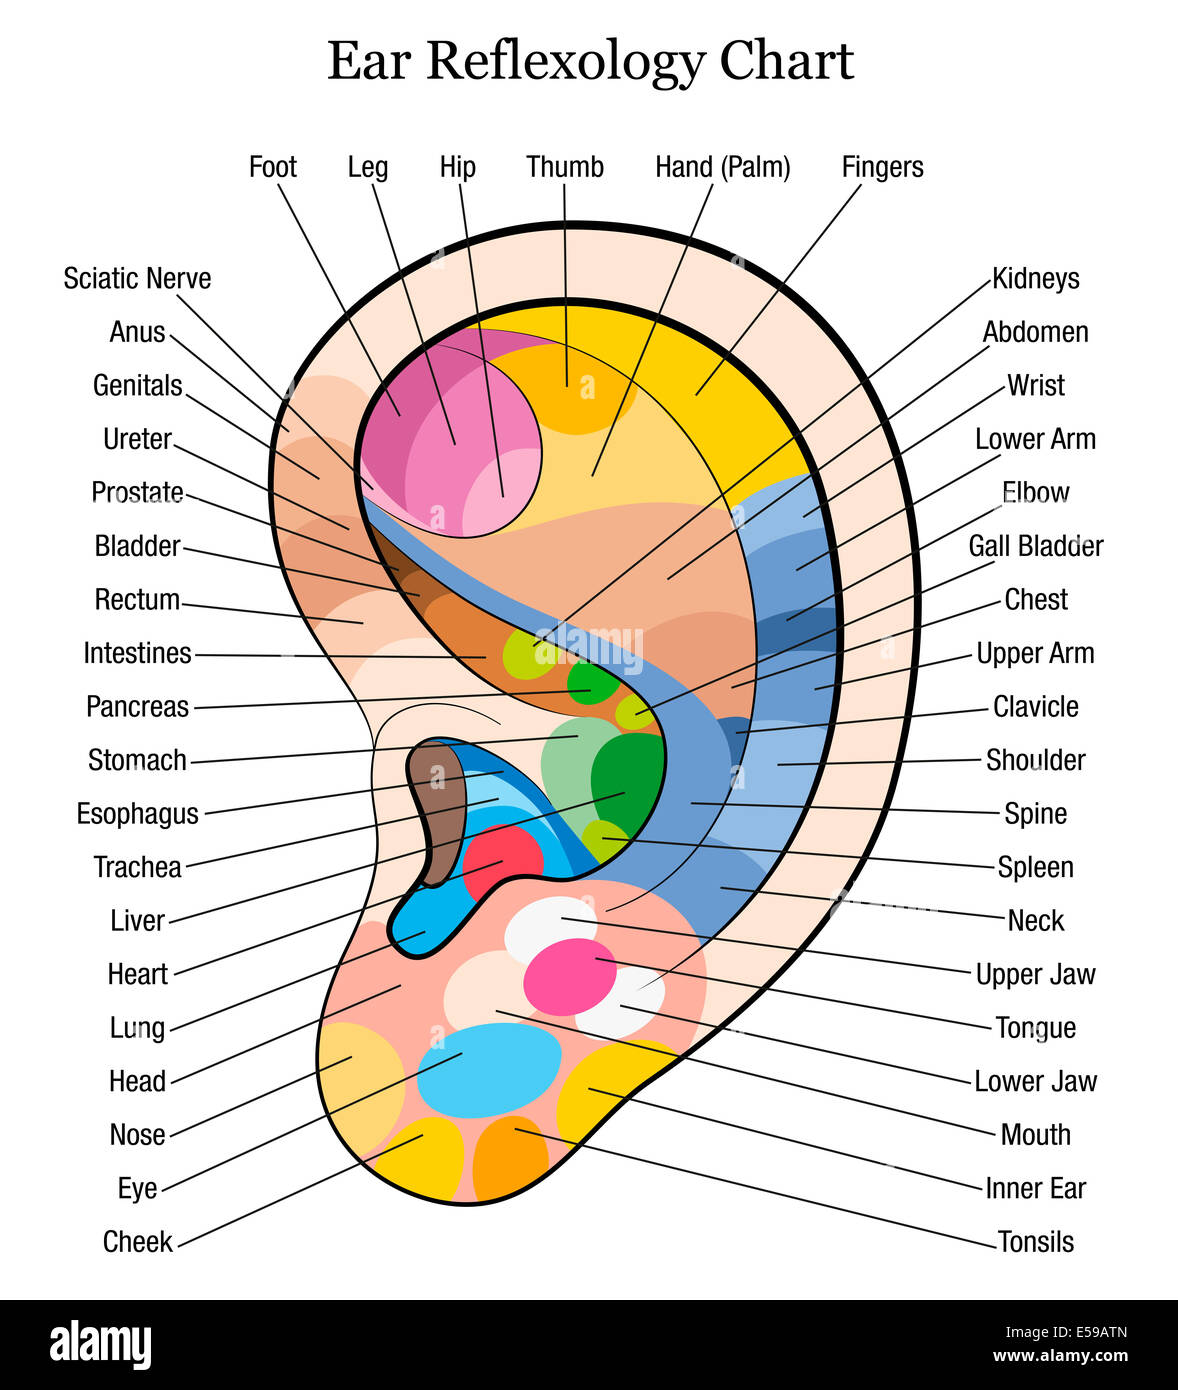 Ear reflexology chart with accurate description of the corresponding internal organs and body parts. Stock Photo